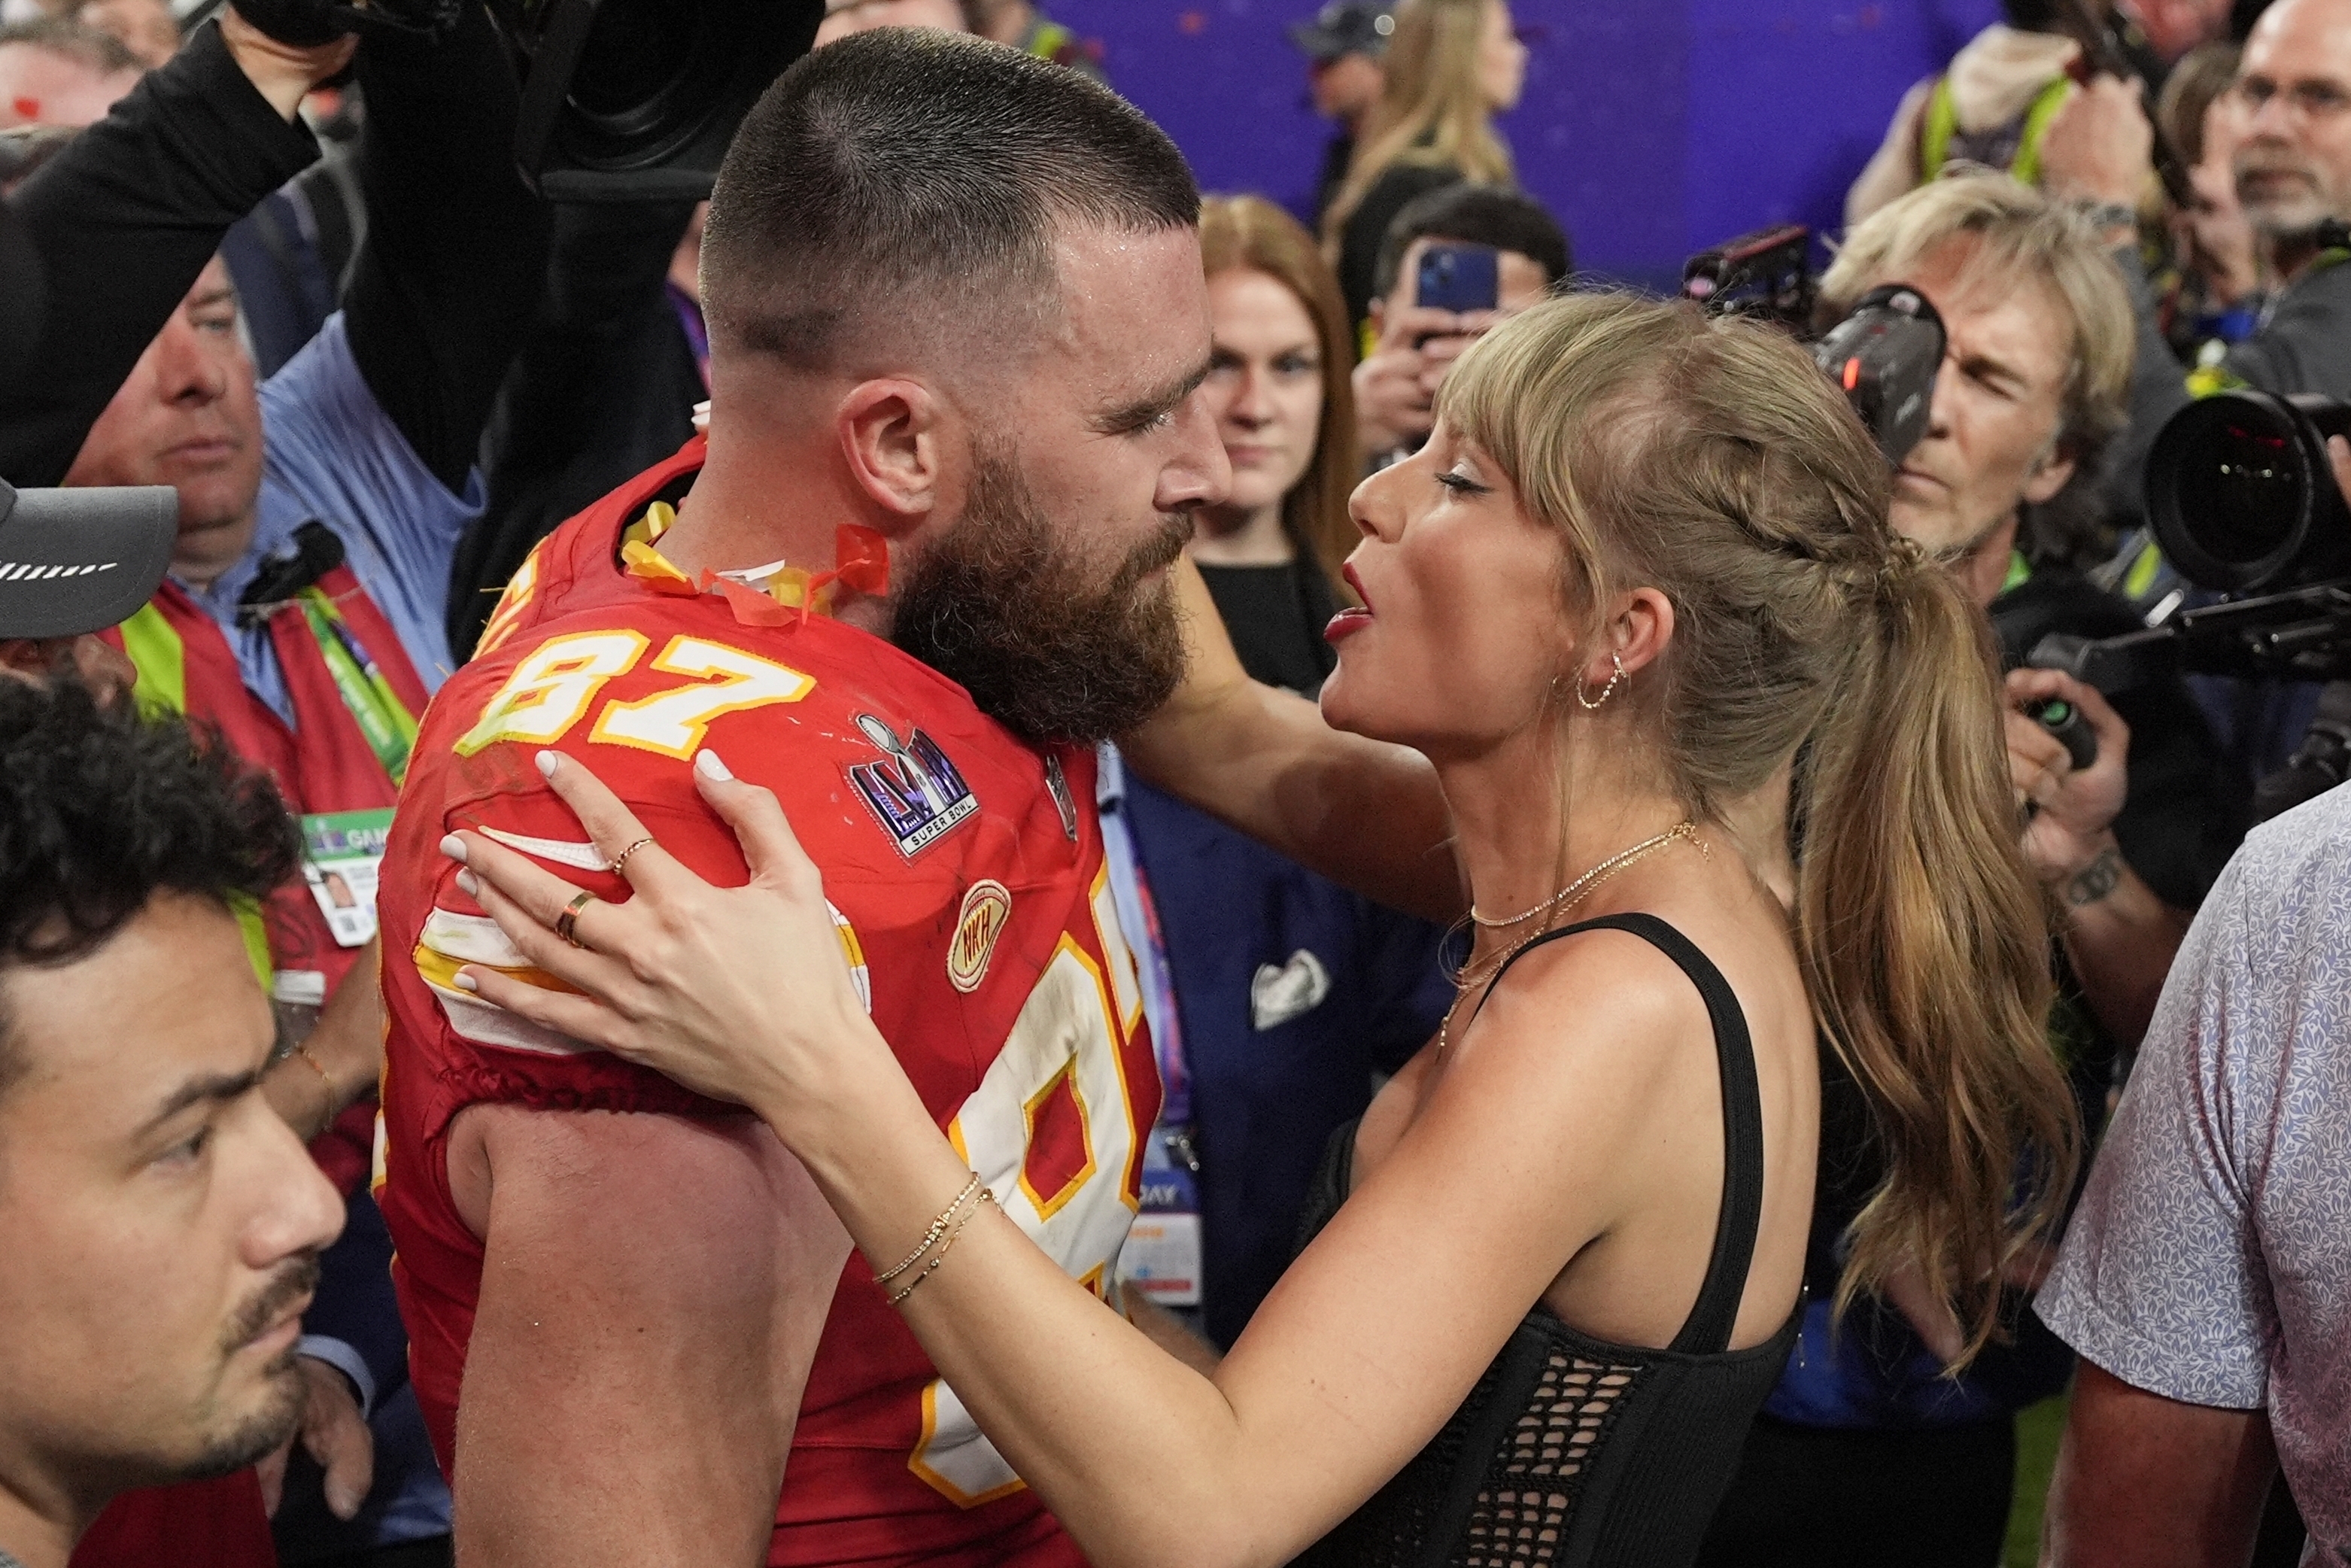 Taylor is now in a relationship with NFL star Travis Kelce